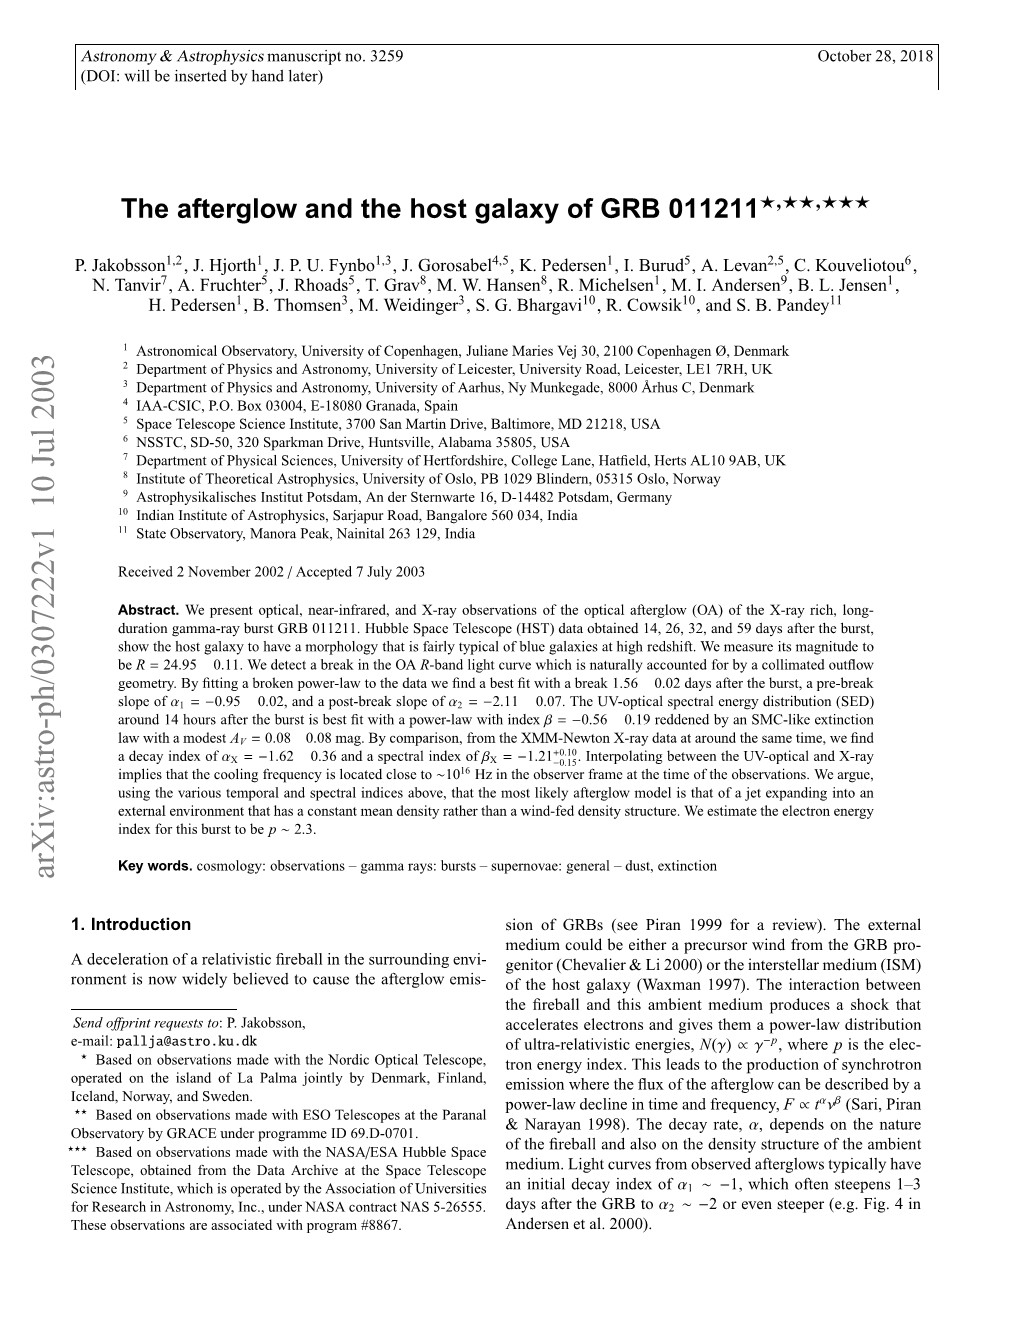 The Afterglow and the Host Galaxy of GRB 011211